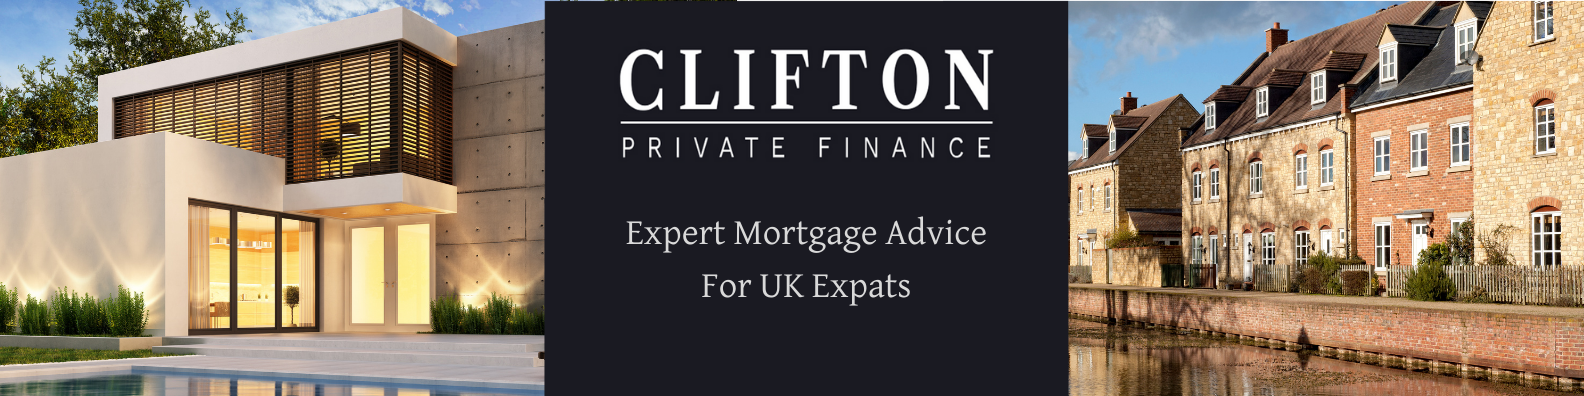 Specialist Mortgage Advice For UK Expats, Clifton Private Finance